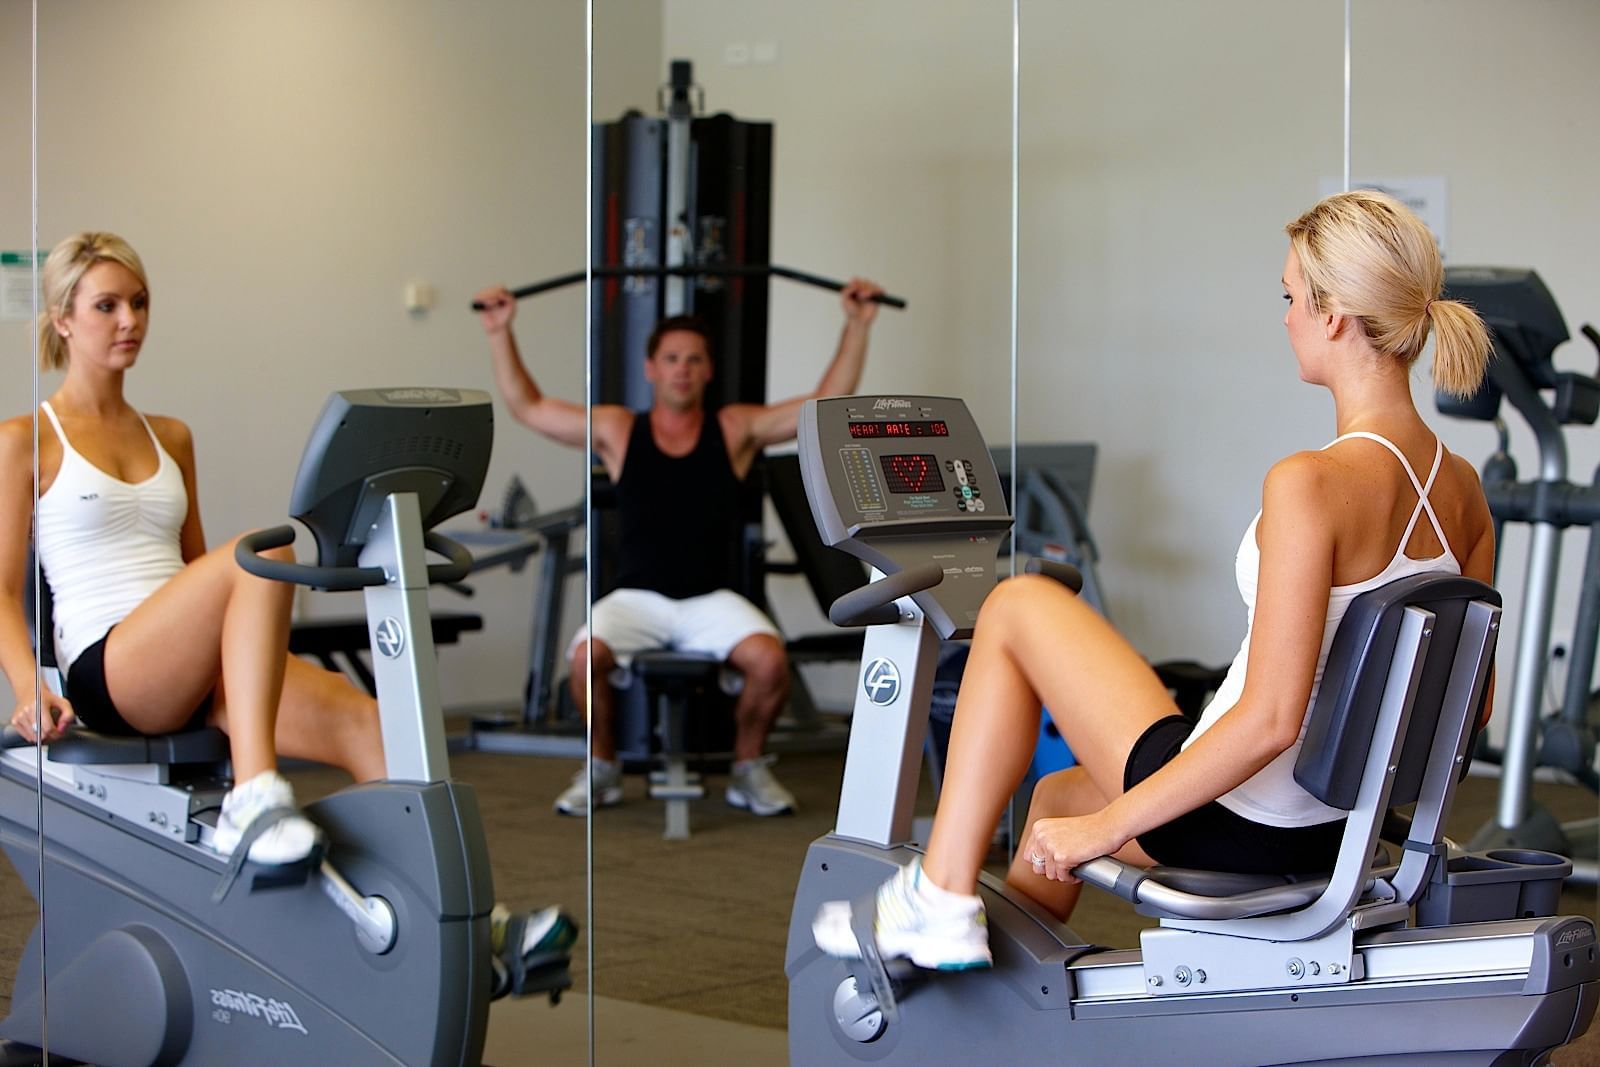 People exercising in the gym at Central Coast resort